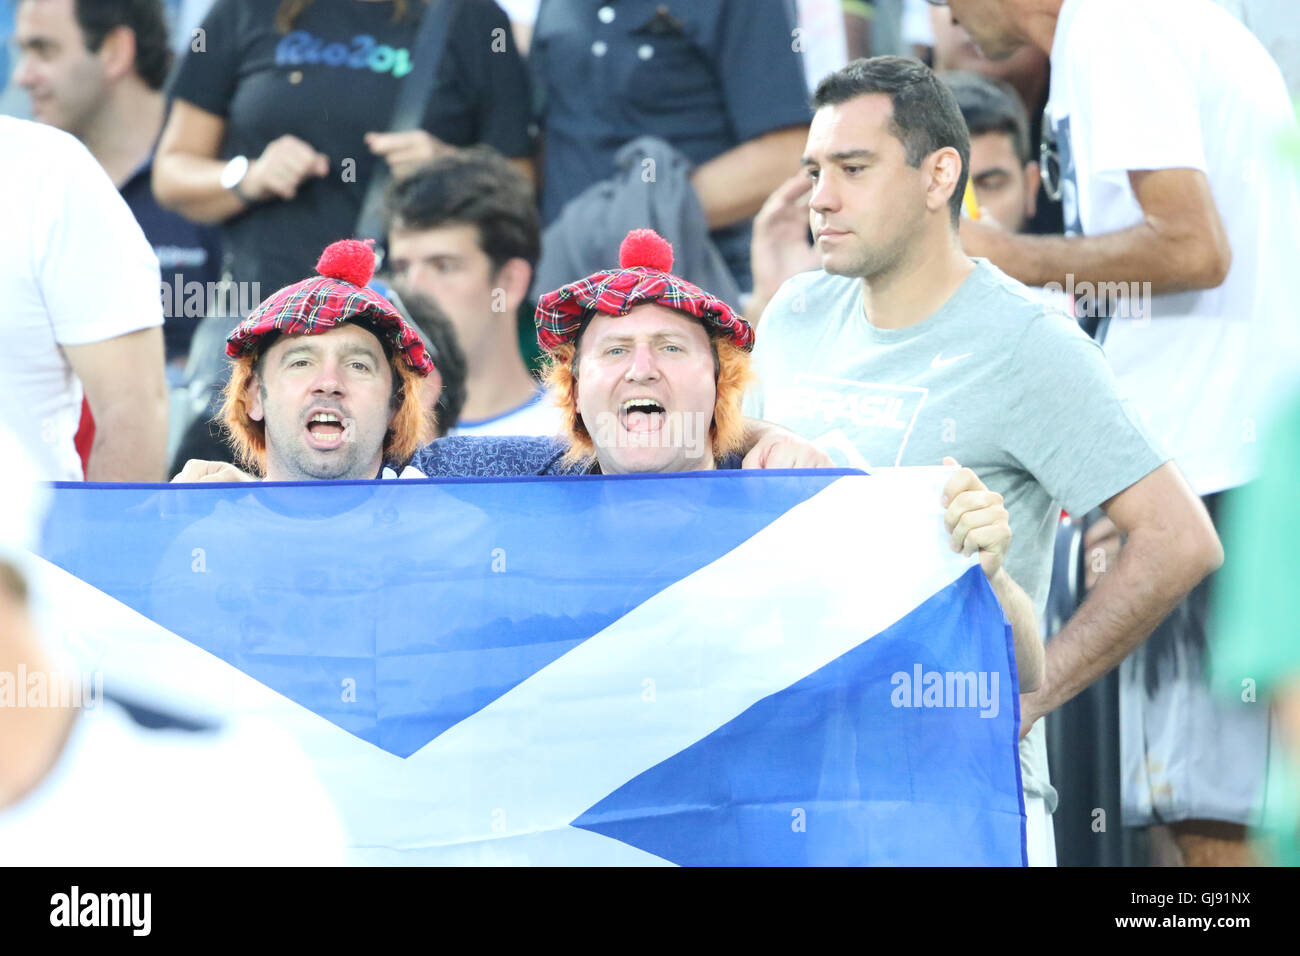 Rio de Janeiro, Brazil. 14th Aug, 2016. Excited Murray supporters waving the Scottish Saltire flag as Murray wins a point in the Olympic mens singles final in Rio de Janeiro, Brazil Credit:  PictureScotland/Alamy Live News Stock Photo